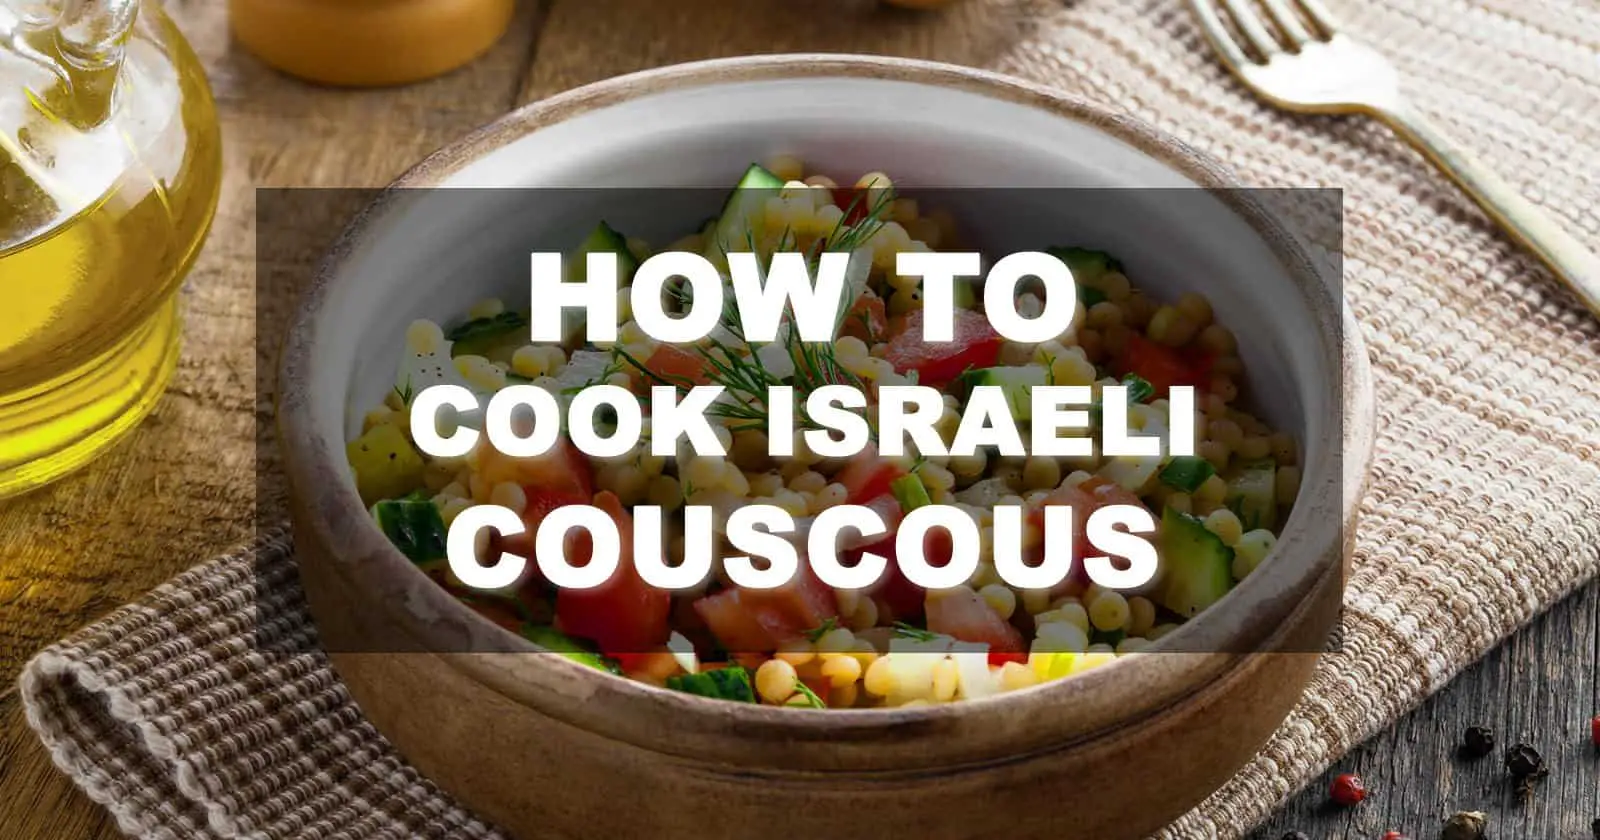 How to Cook Israeli Couscous